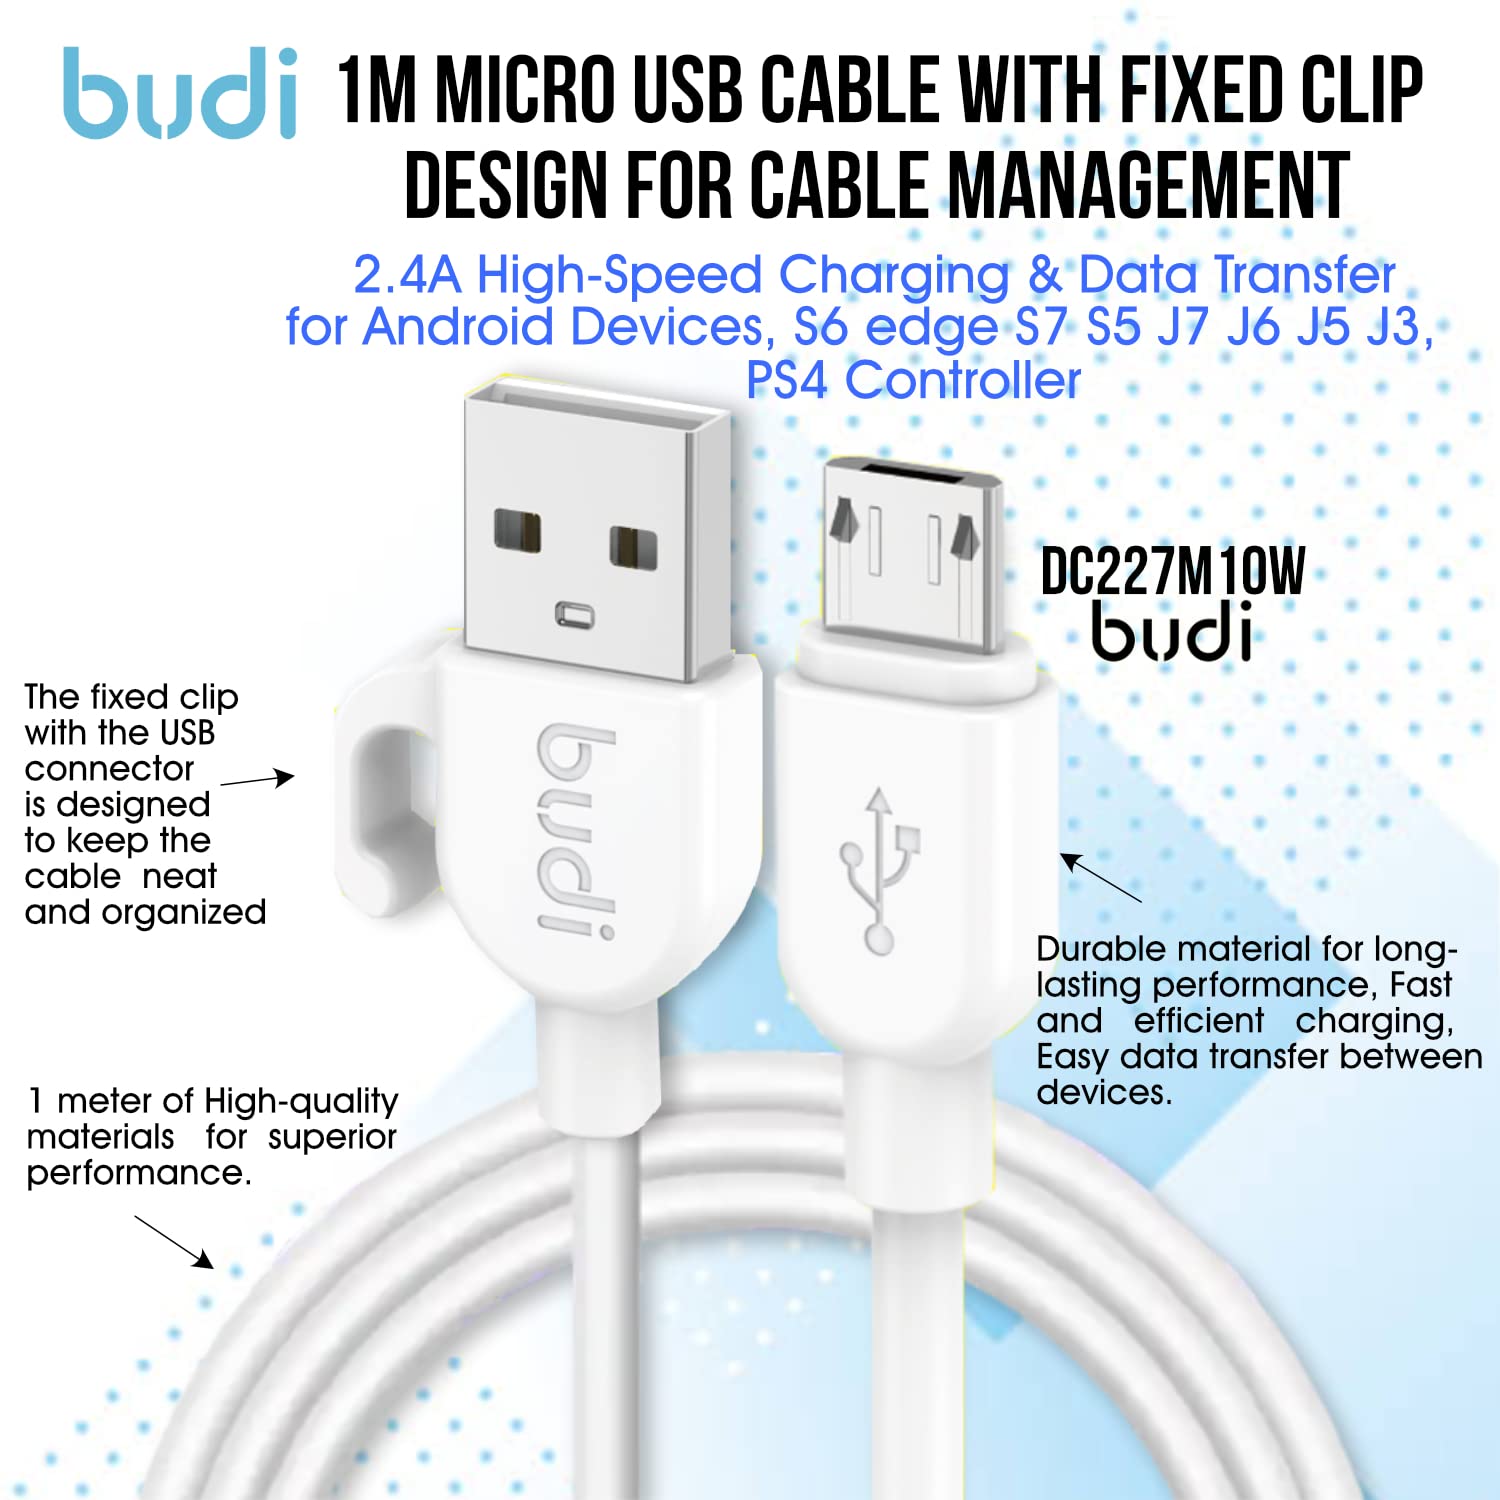 USB to Lightning Charge & Sync Cable, USB to Type C Charge & Sync Cable, USB to Micro Charge & Sync Cable